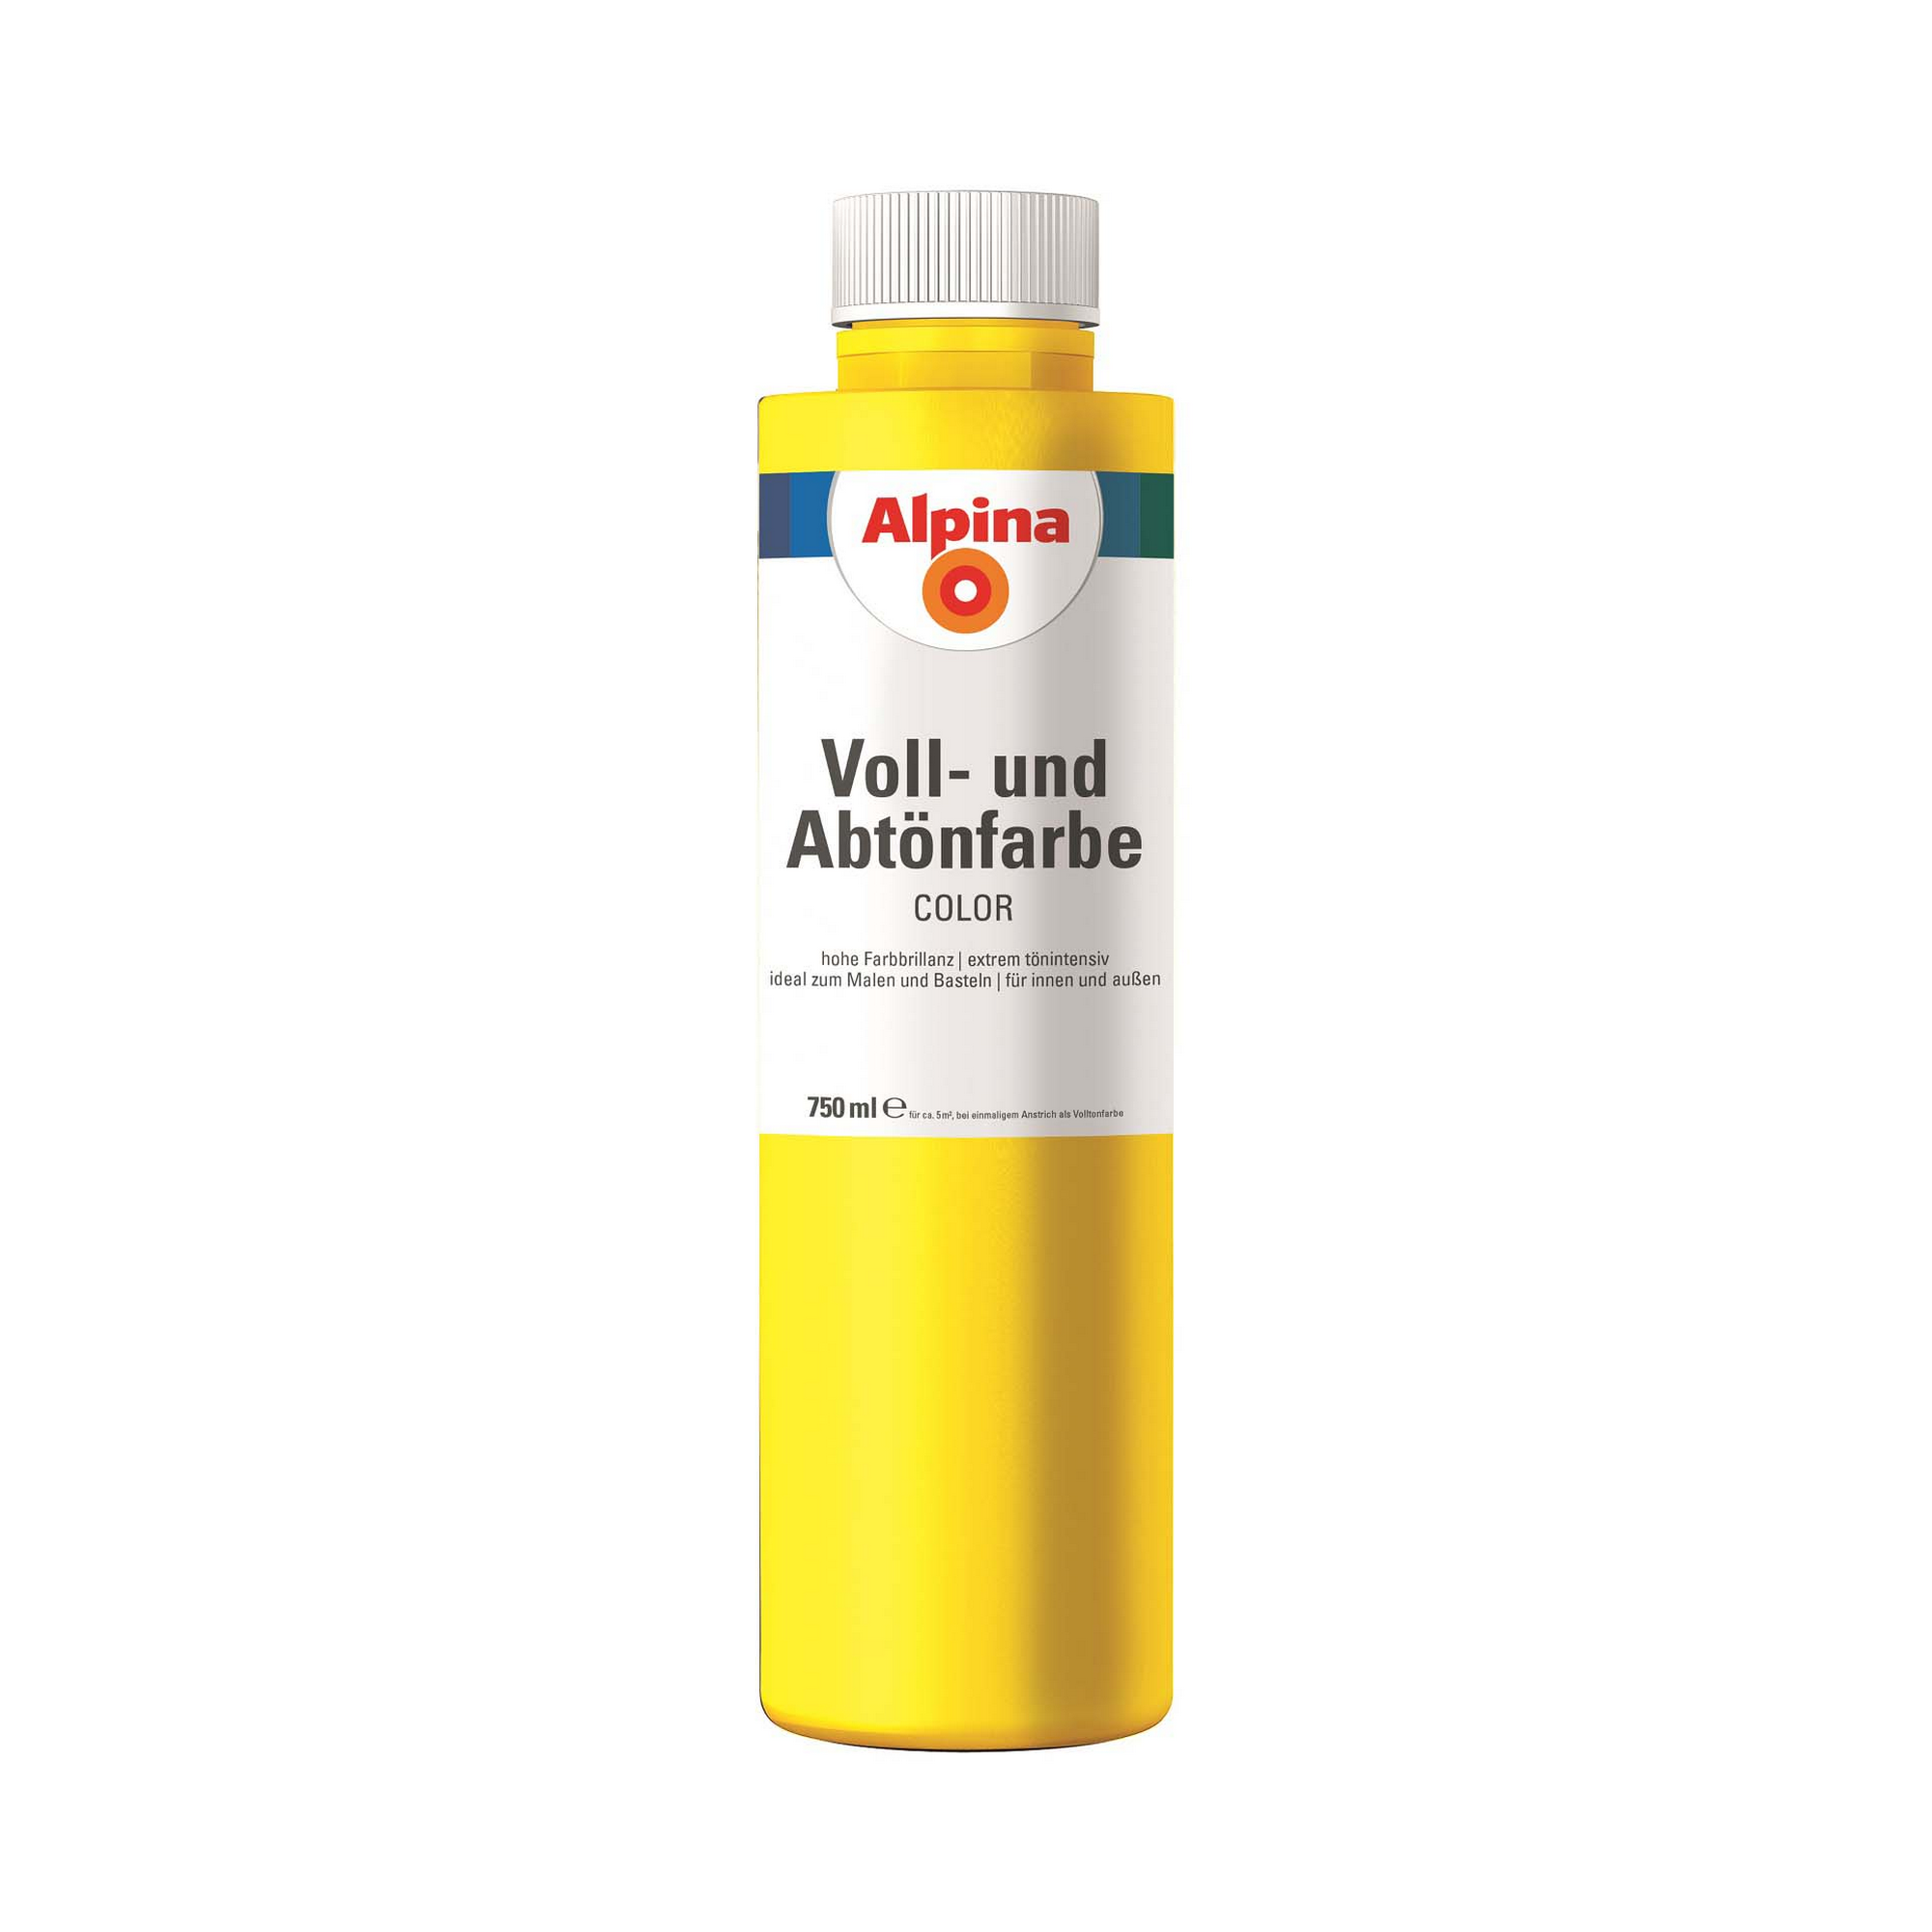 Voll- und Abtönfarbe 'Sunny Yellow' gelb 750 ml + product picture